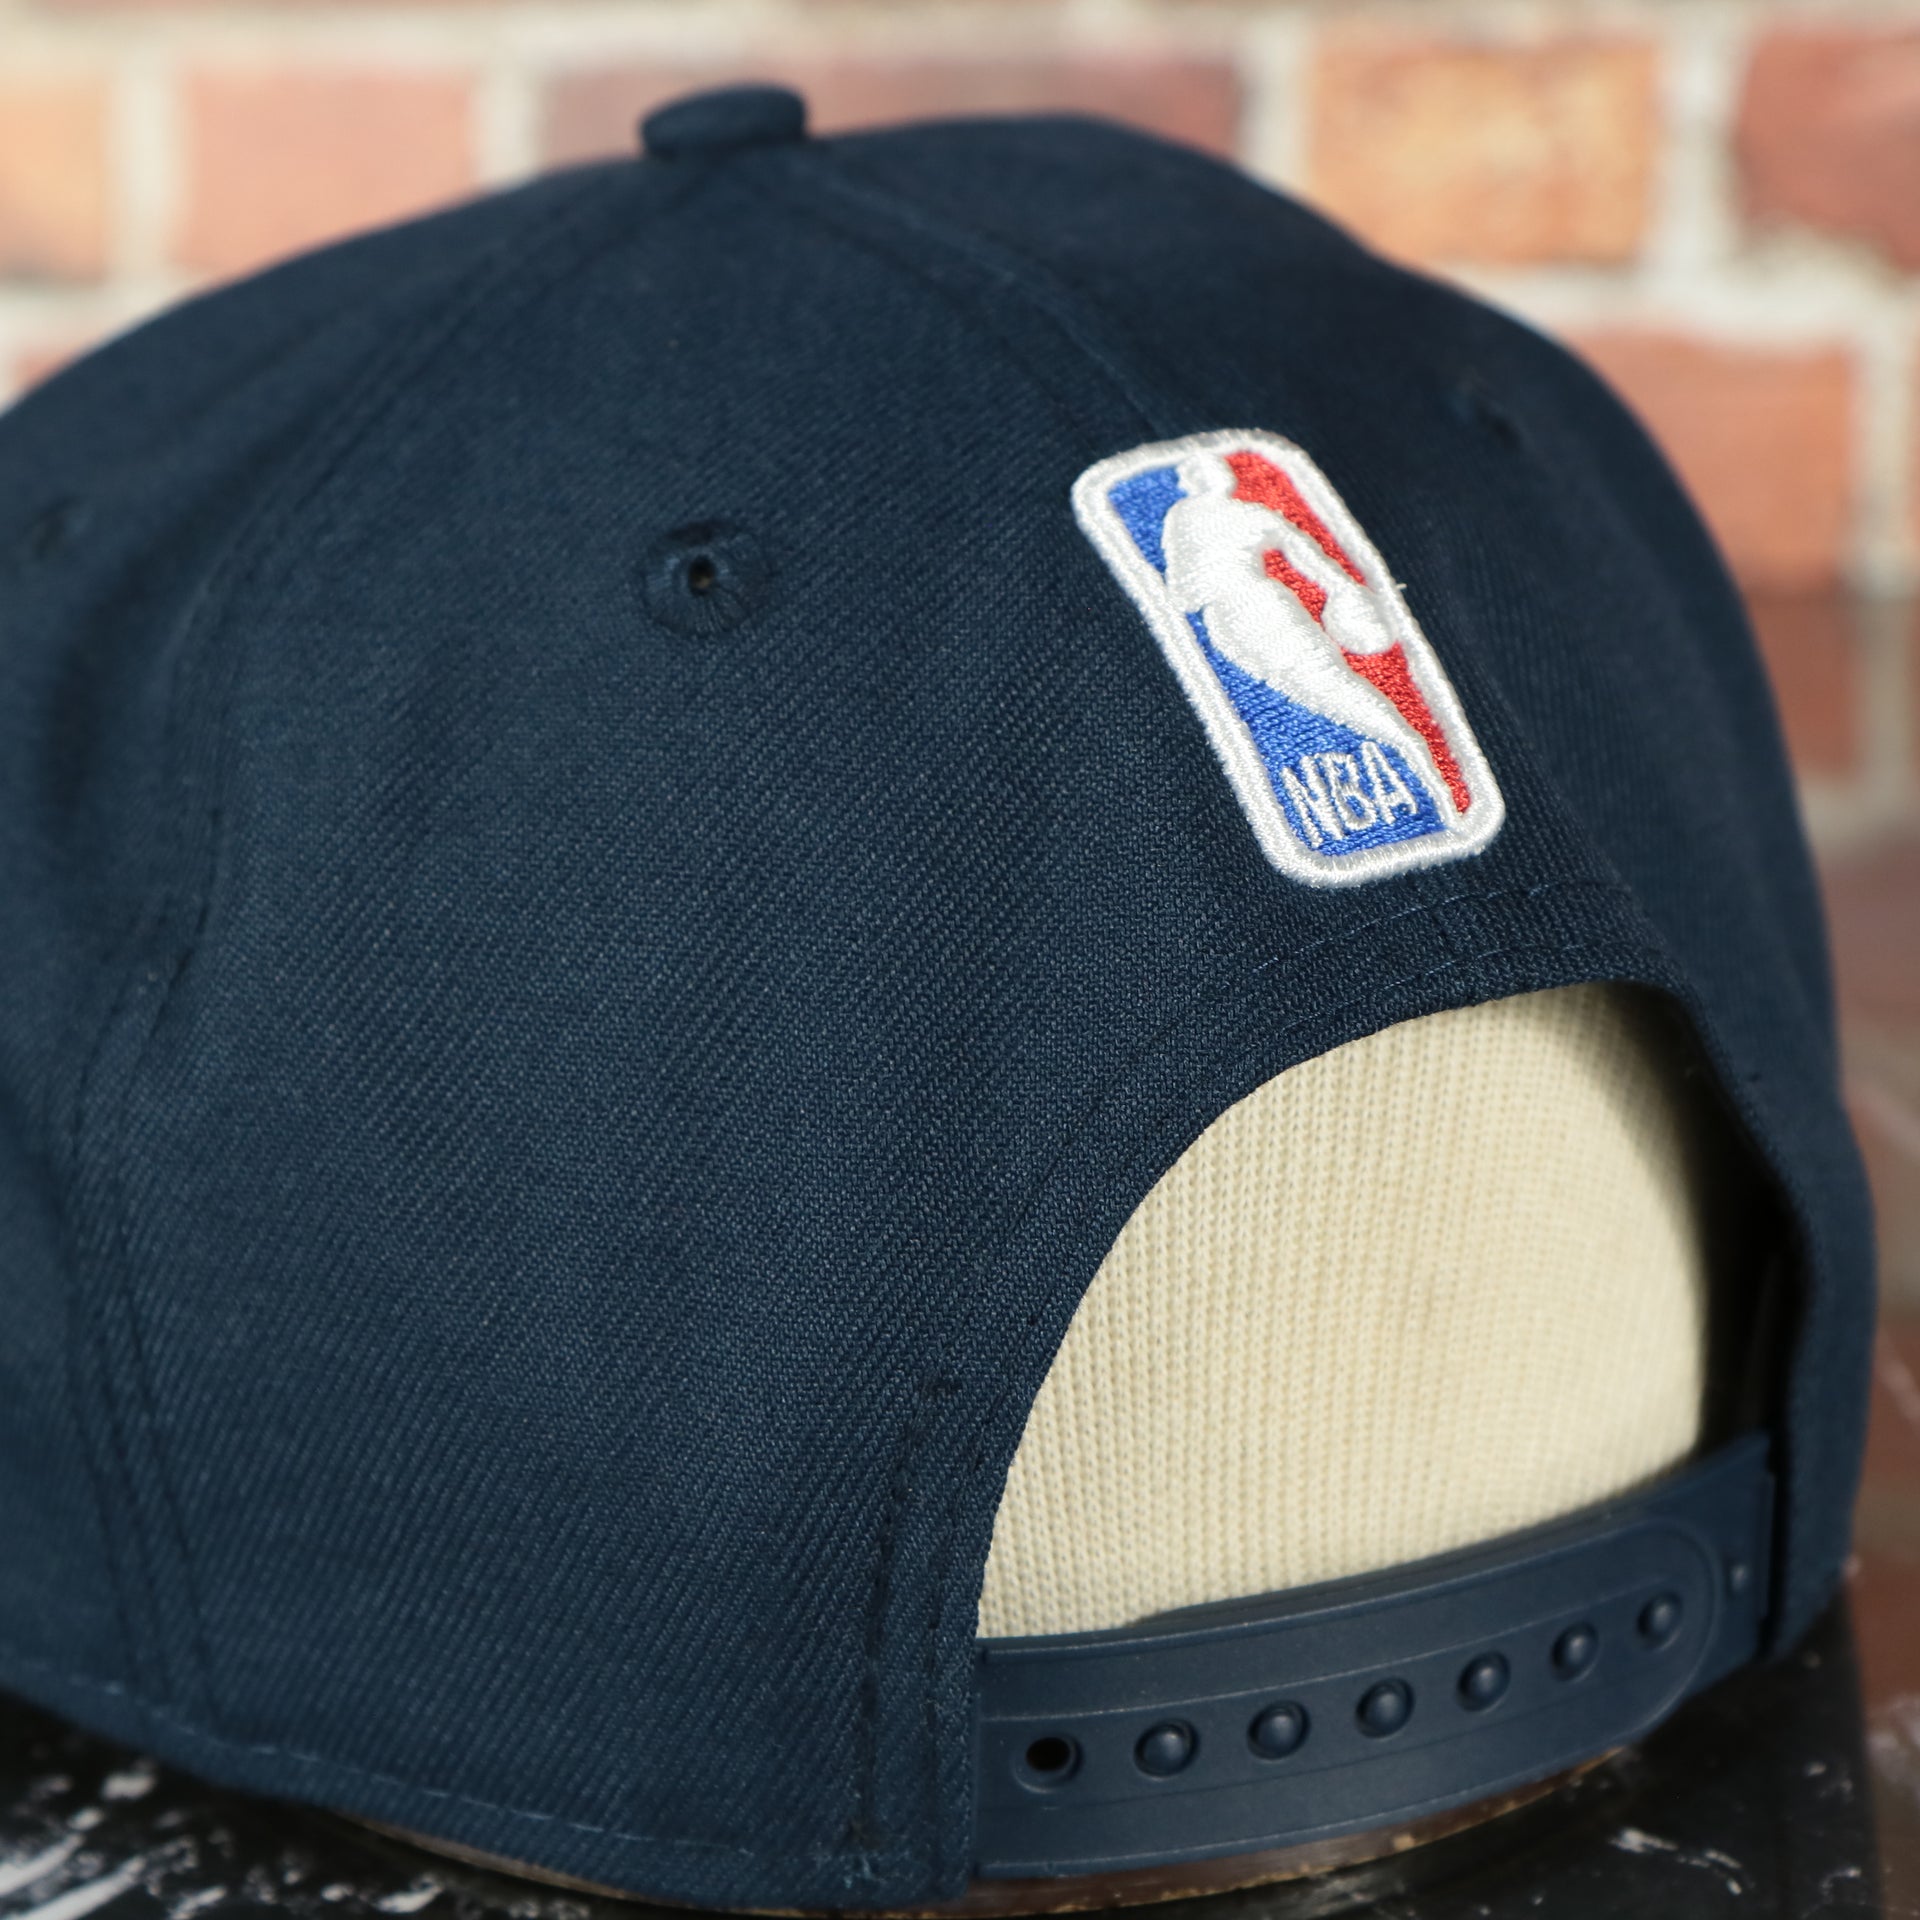 adjustable snap on the Pelicans 2020 NBA Draft Snapback Hat | New Orleans Pelicans NBA 2020 Draft Snap Hat